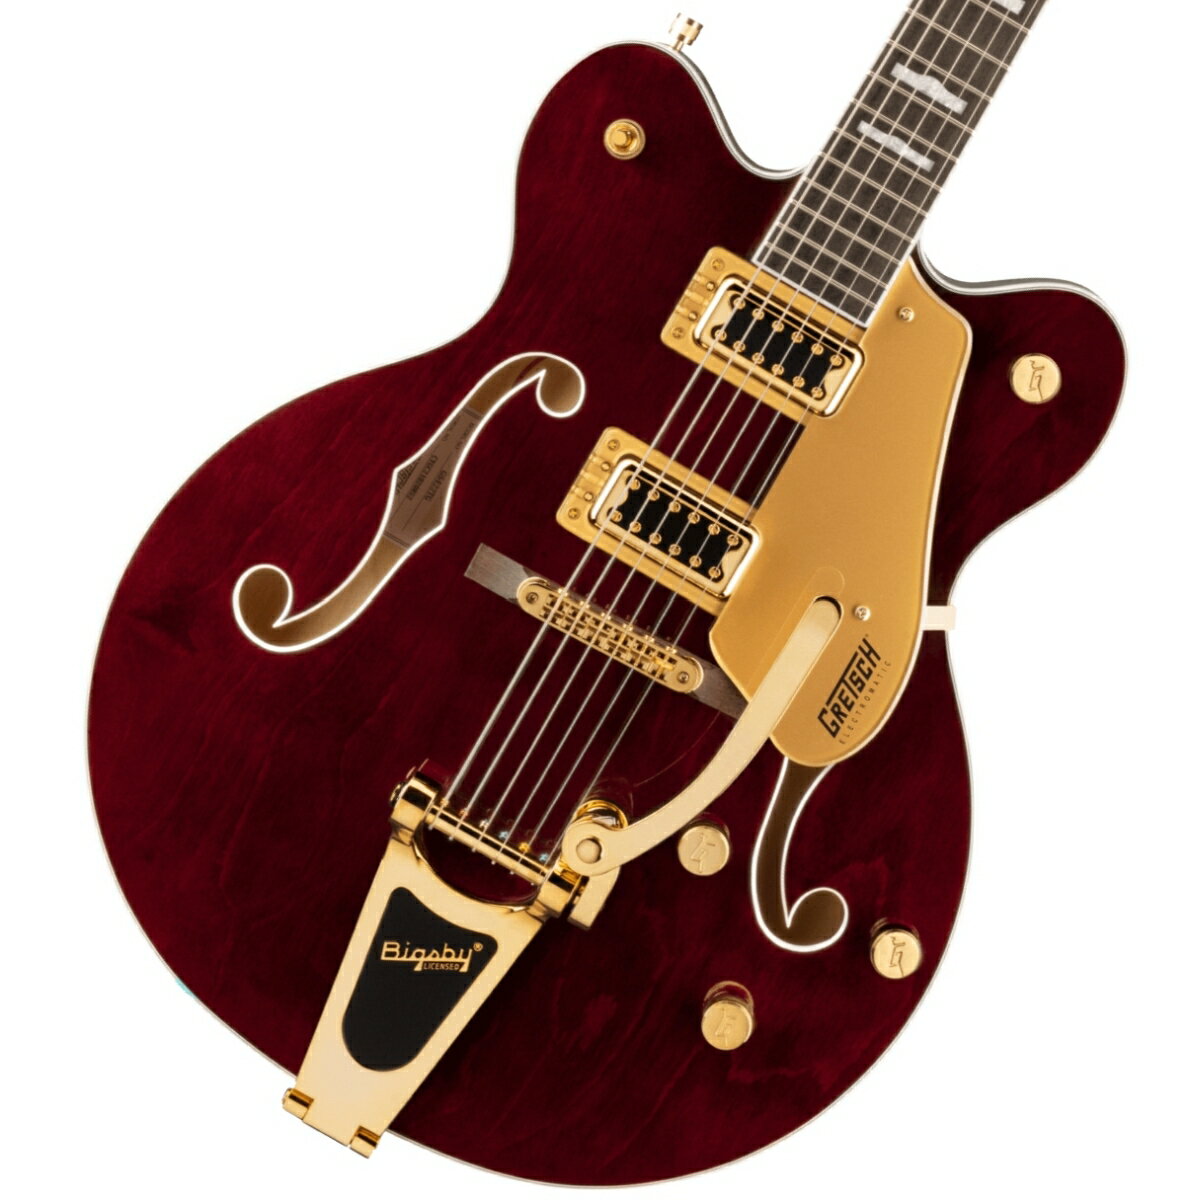 《WEBSHOPクリアランスセール》Gretsch / G5422TG Electromatic Classic Hollow Body Double-Cut with Bigsby and Gold Hardware Laurel Fingerboard Walnut Stain《+4582600680067》【PNG】